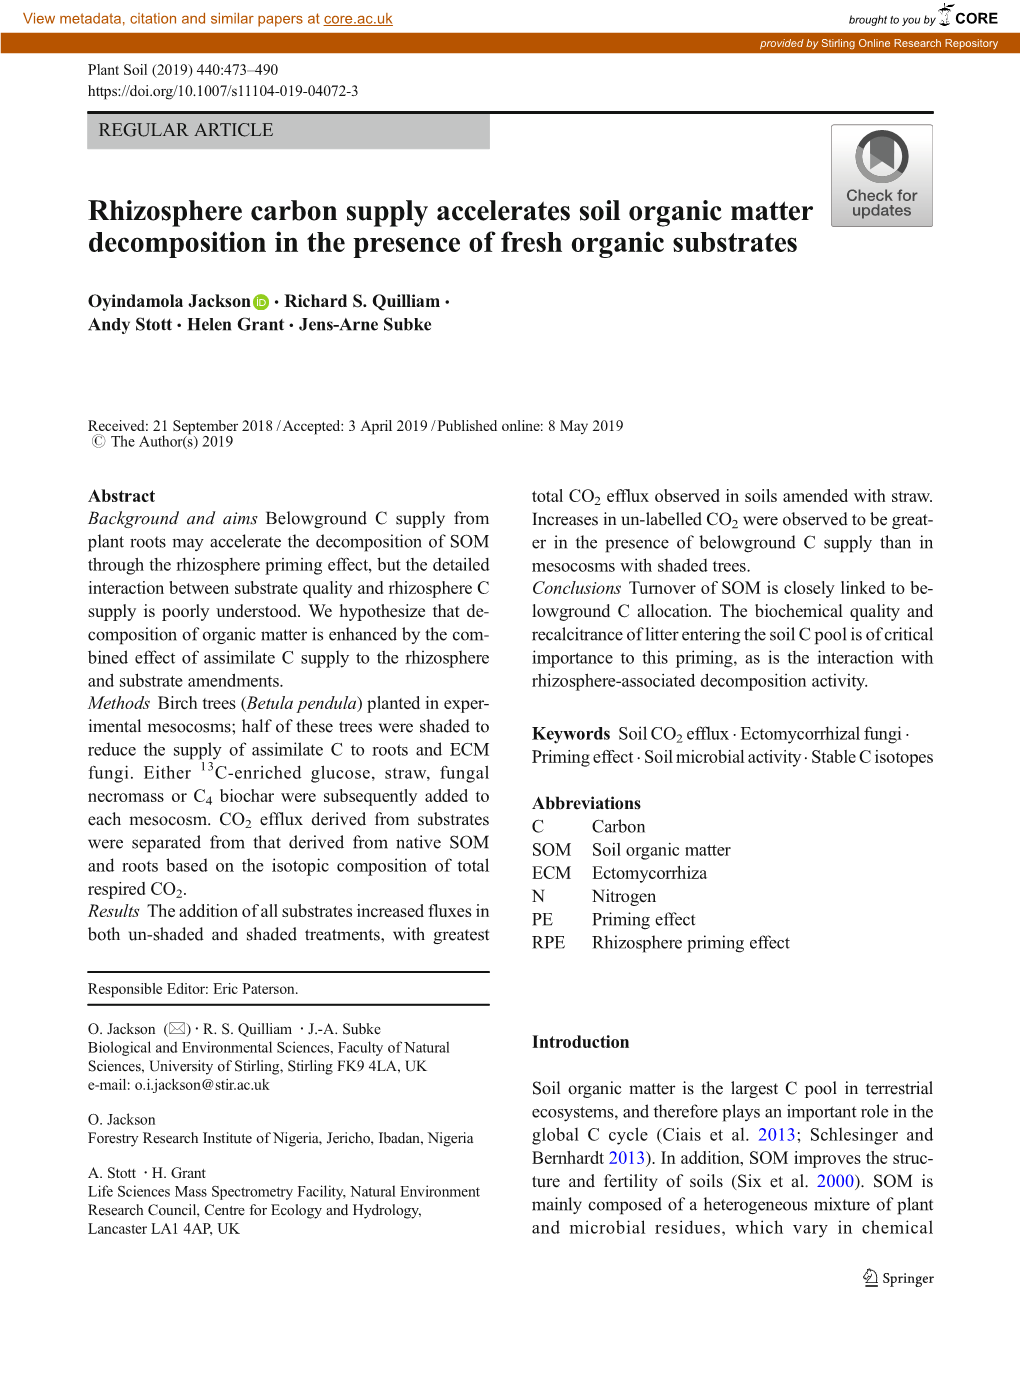 Rhizosphere Carbon Supply Accelerates Soil Organic Matter Decomposition in the Presence of Fresh Organic Substrates